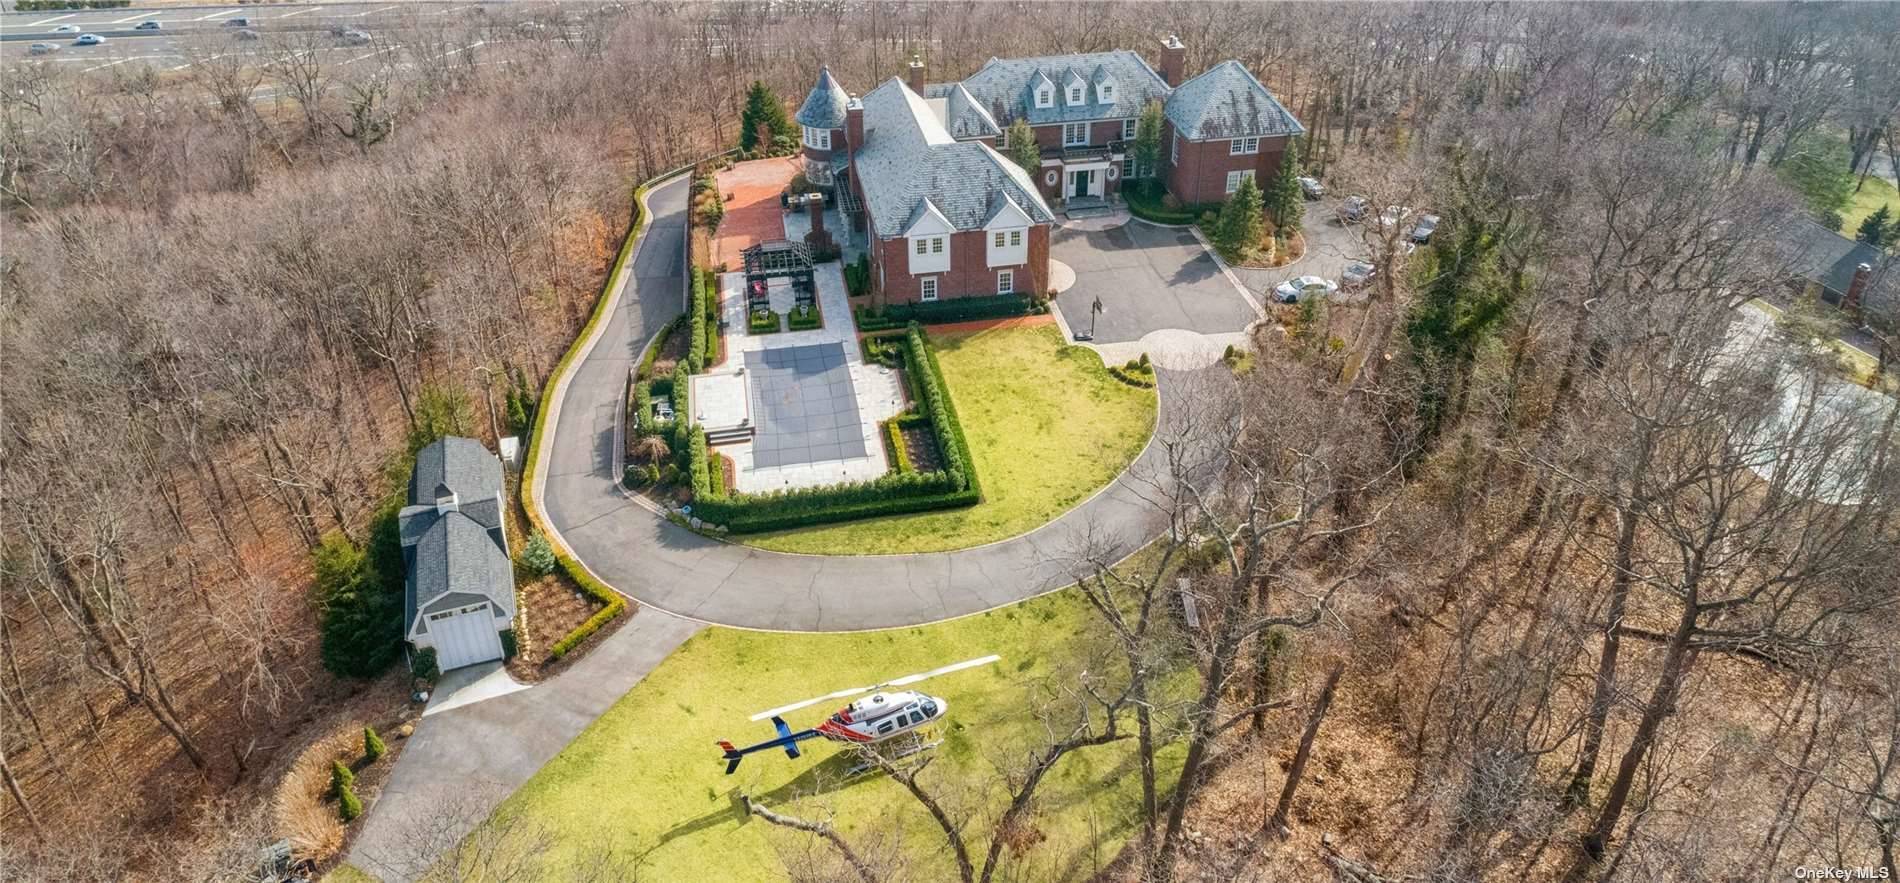 Melville. This majestic brick, 6 bedroom, 6 bath, 3 powder room home sits high up on a hill overlooking all of Long Island with its own, FAA recognized, heliport.